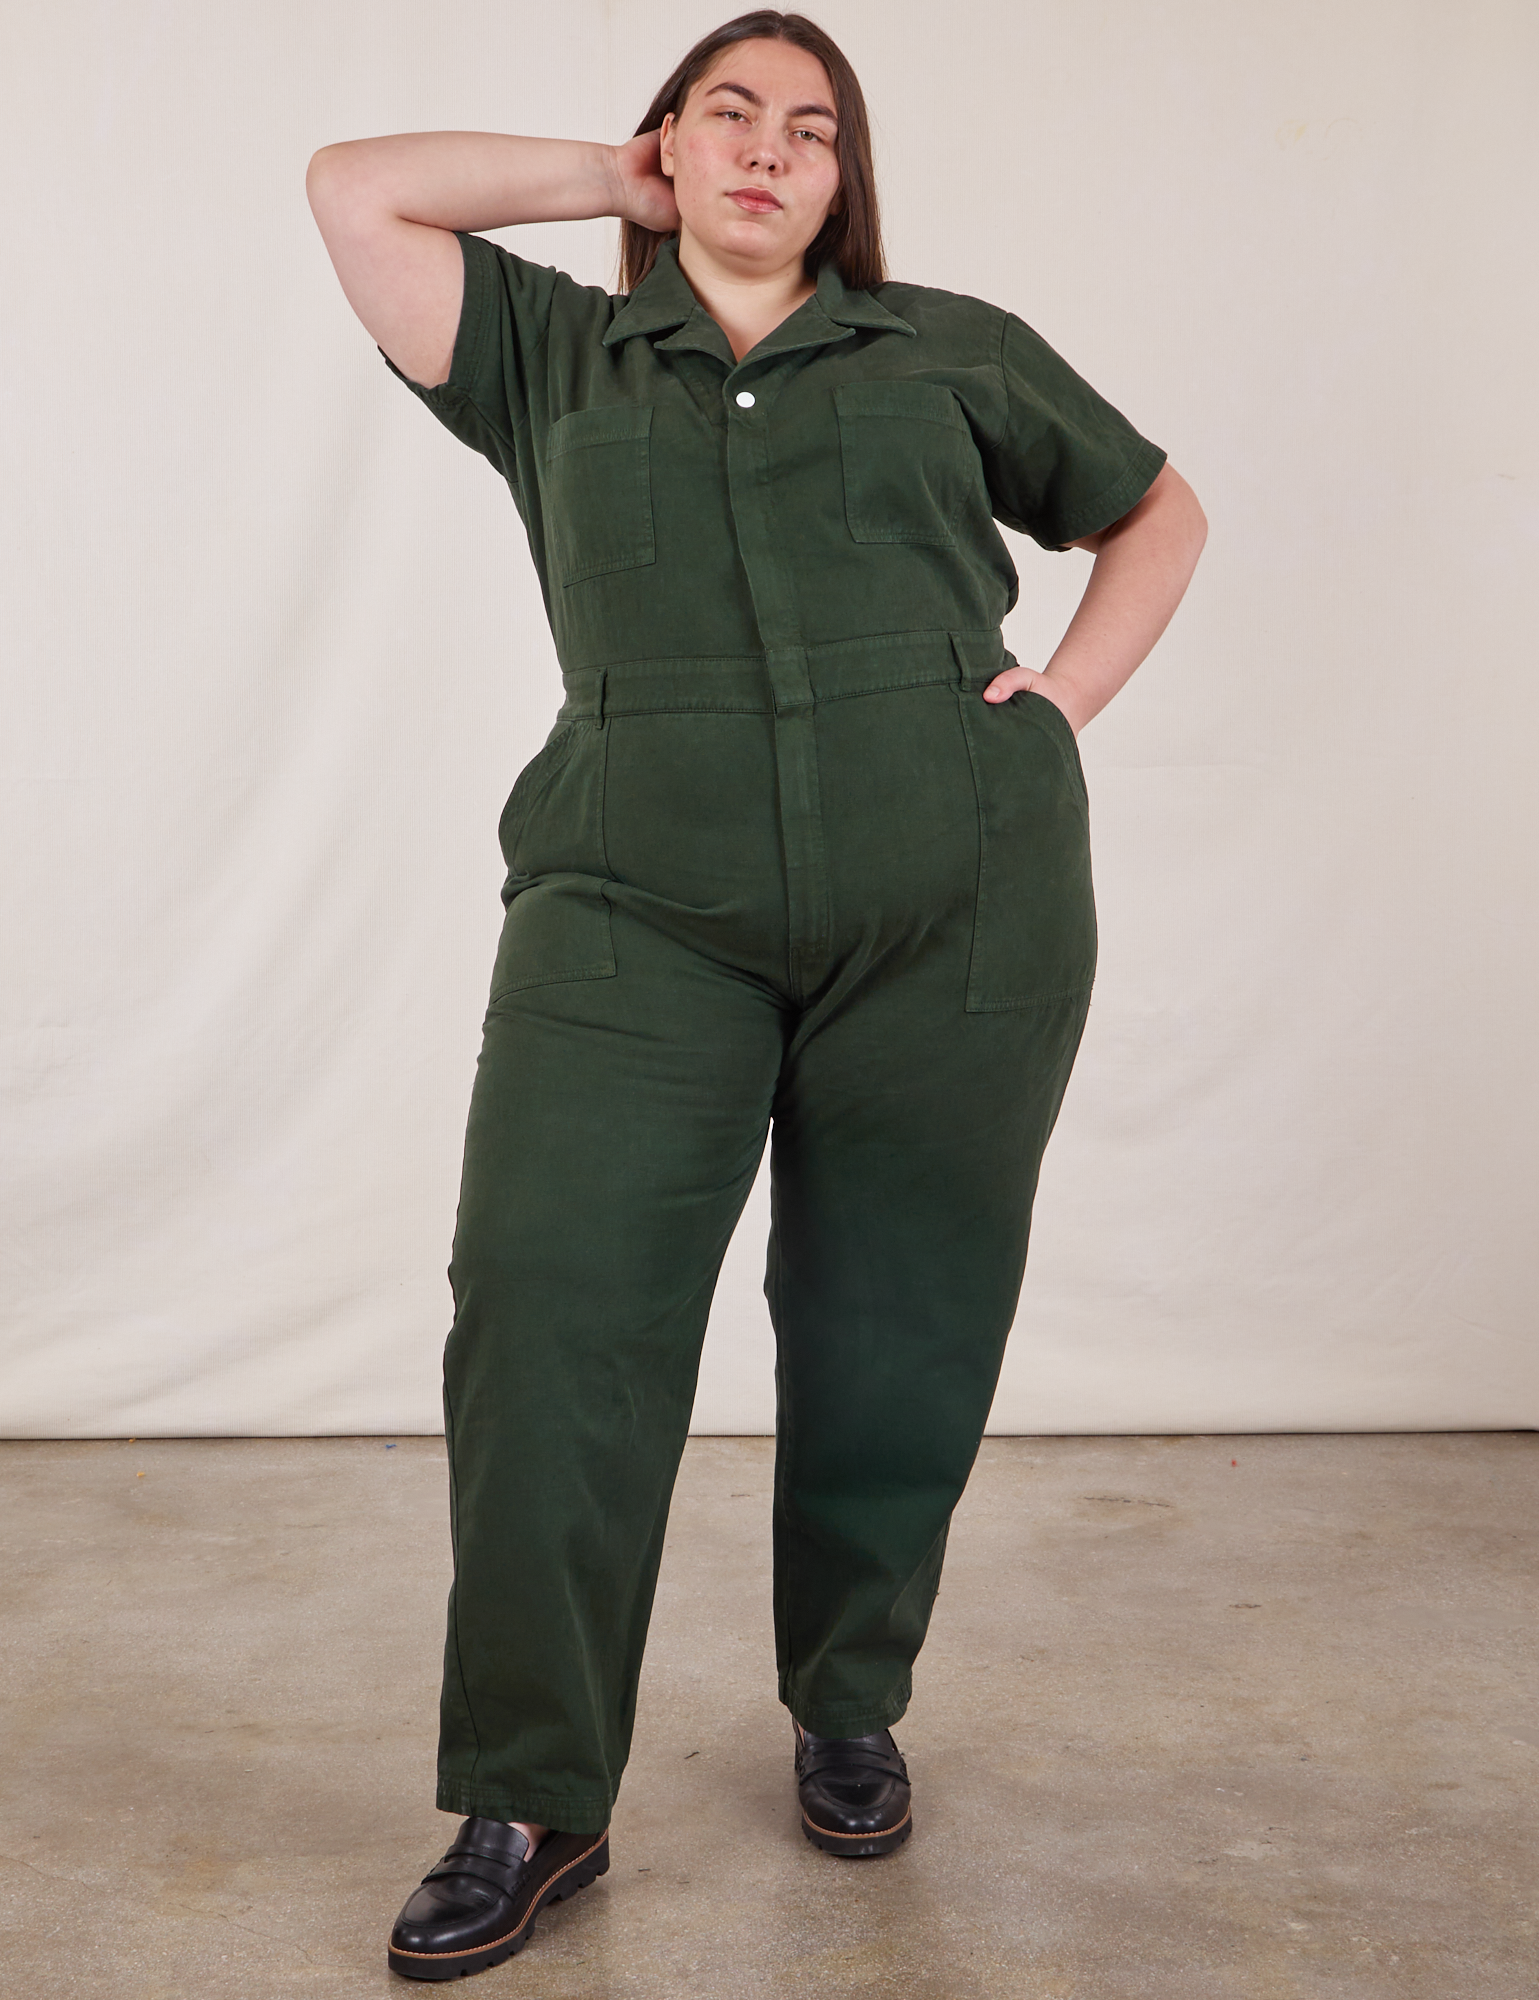 Marielena is 5’8” and wearing 2XL Short Sleeve Jumpsuit in Swamp Green